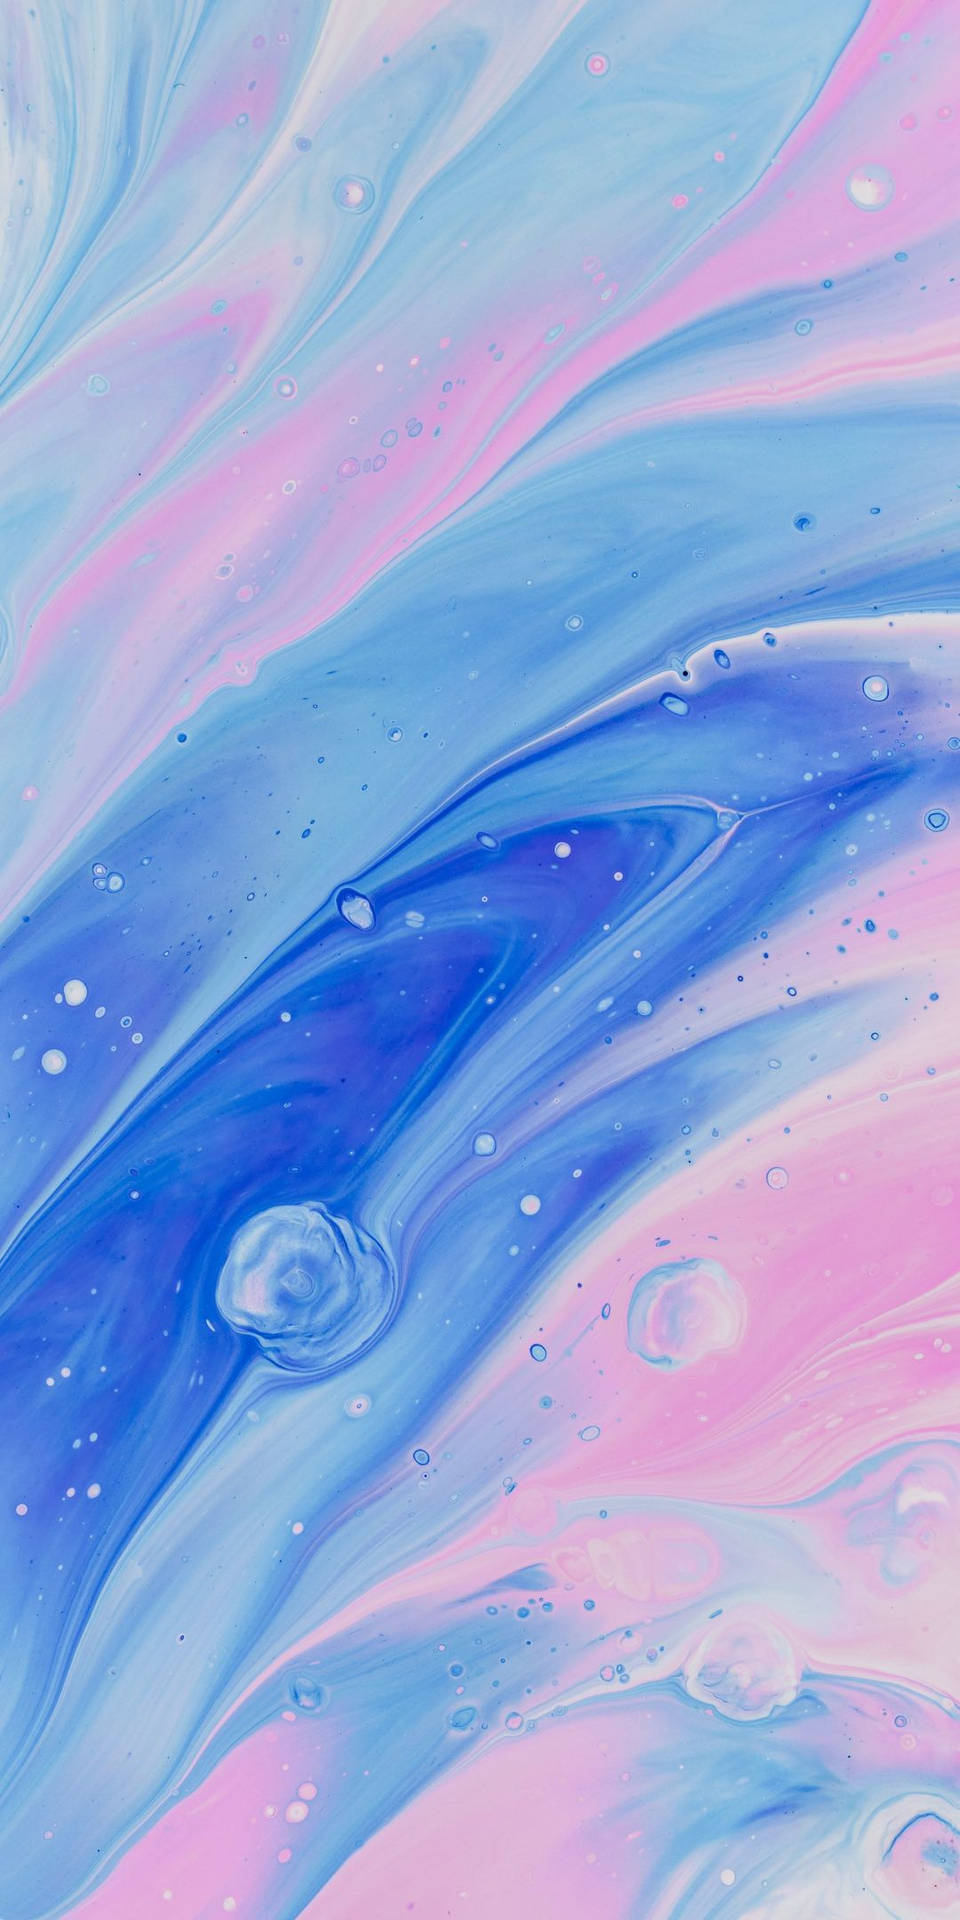 Vibrant Pink And Blue Hydro Dip Pattern Background